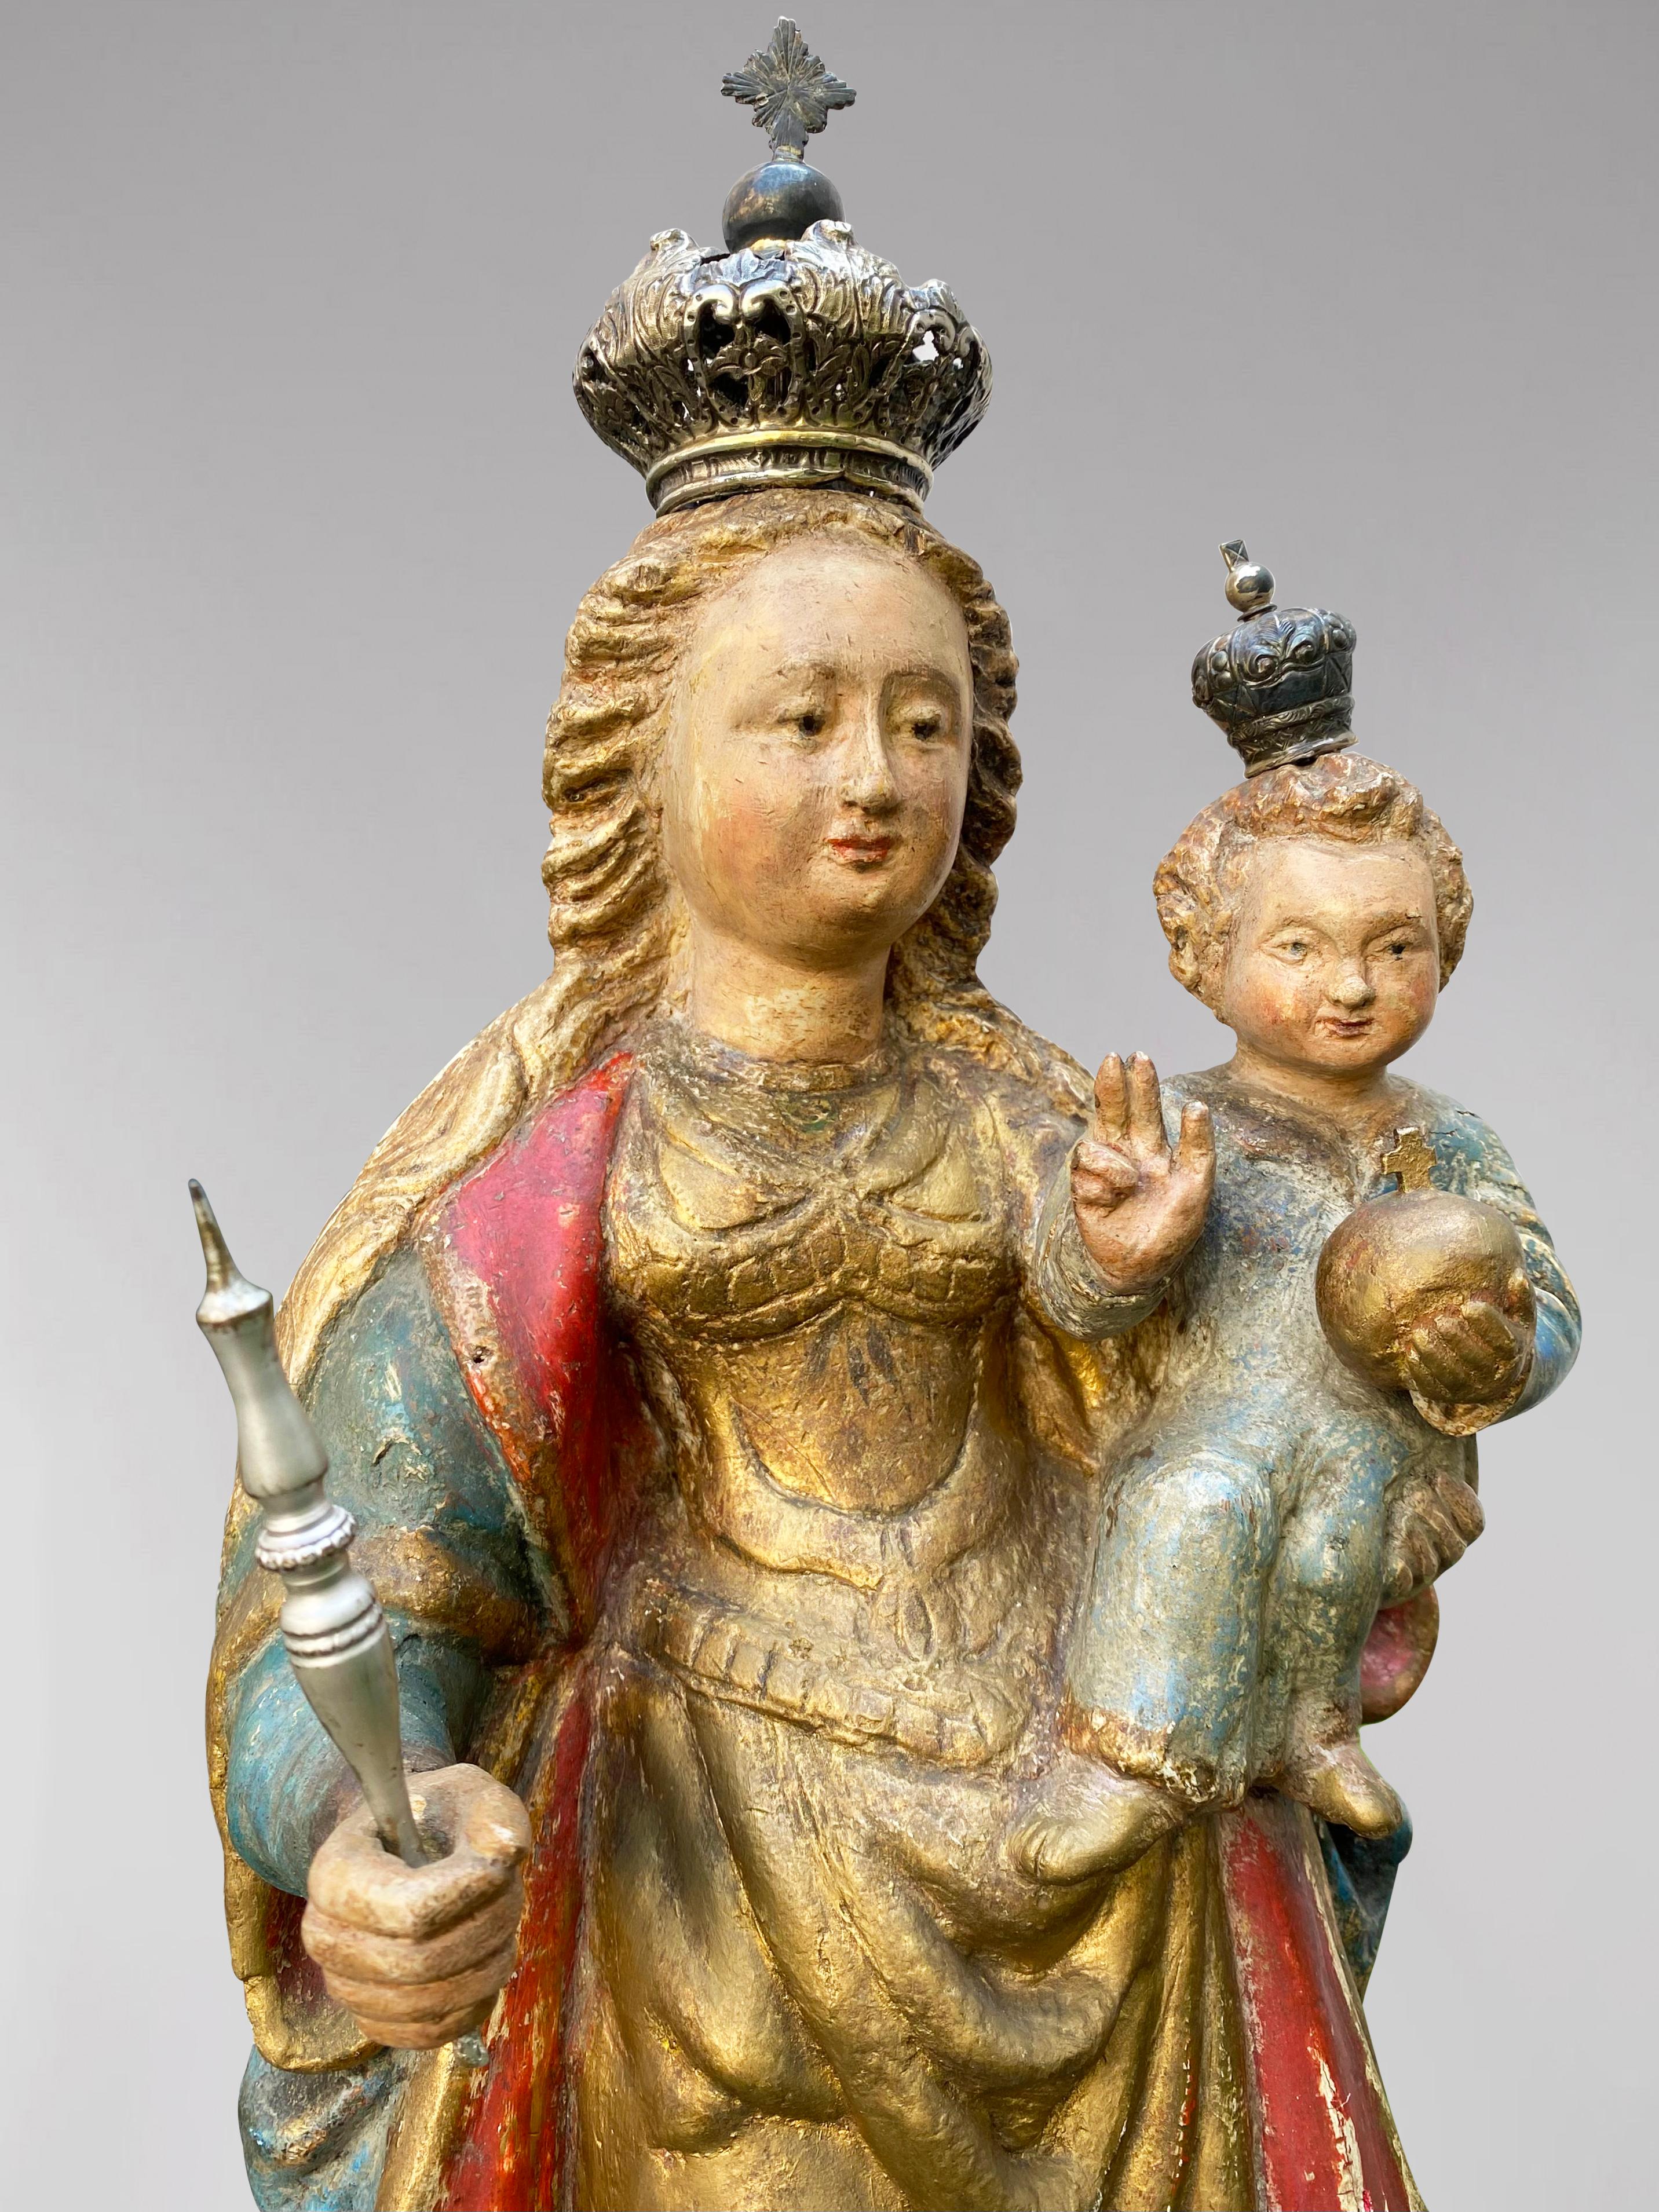 A Flemish Statue of Crowned Virgin Mary with Child Jesus, 17th Century - Renaissance Sculpture by Unknown